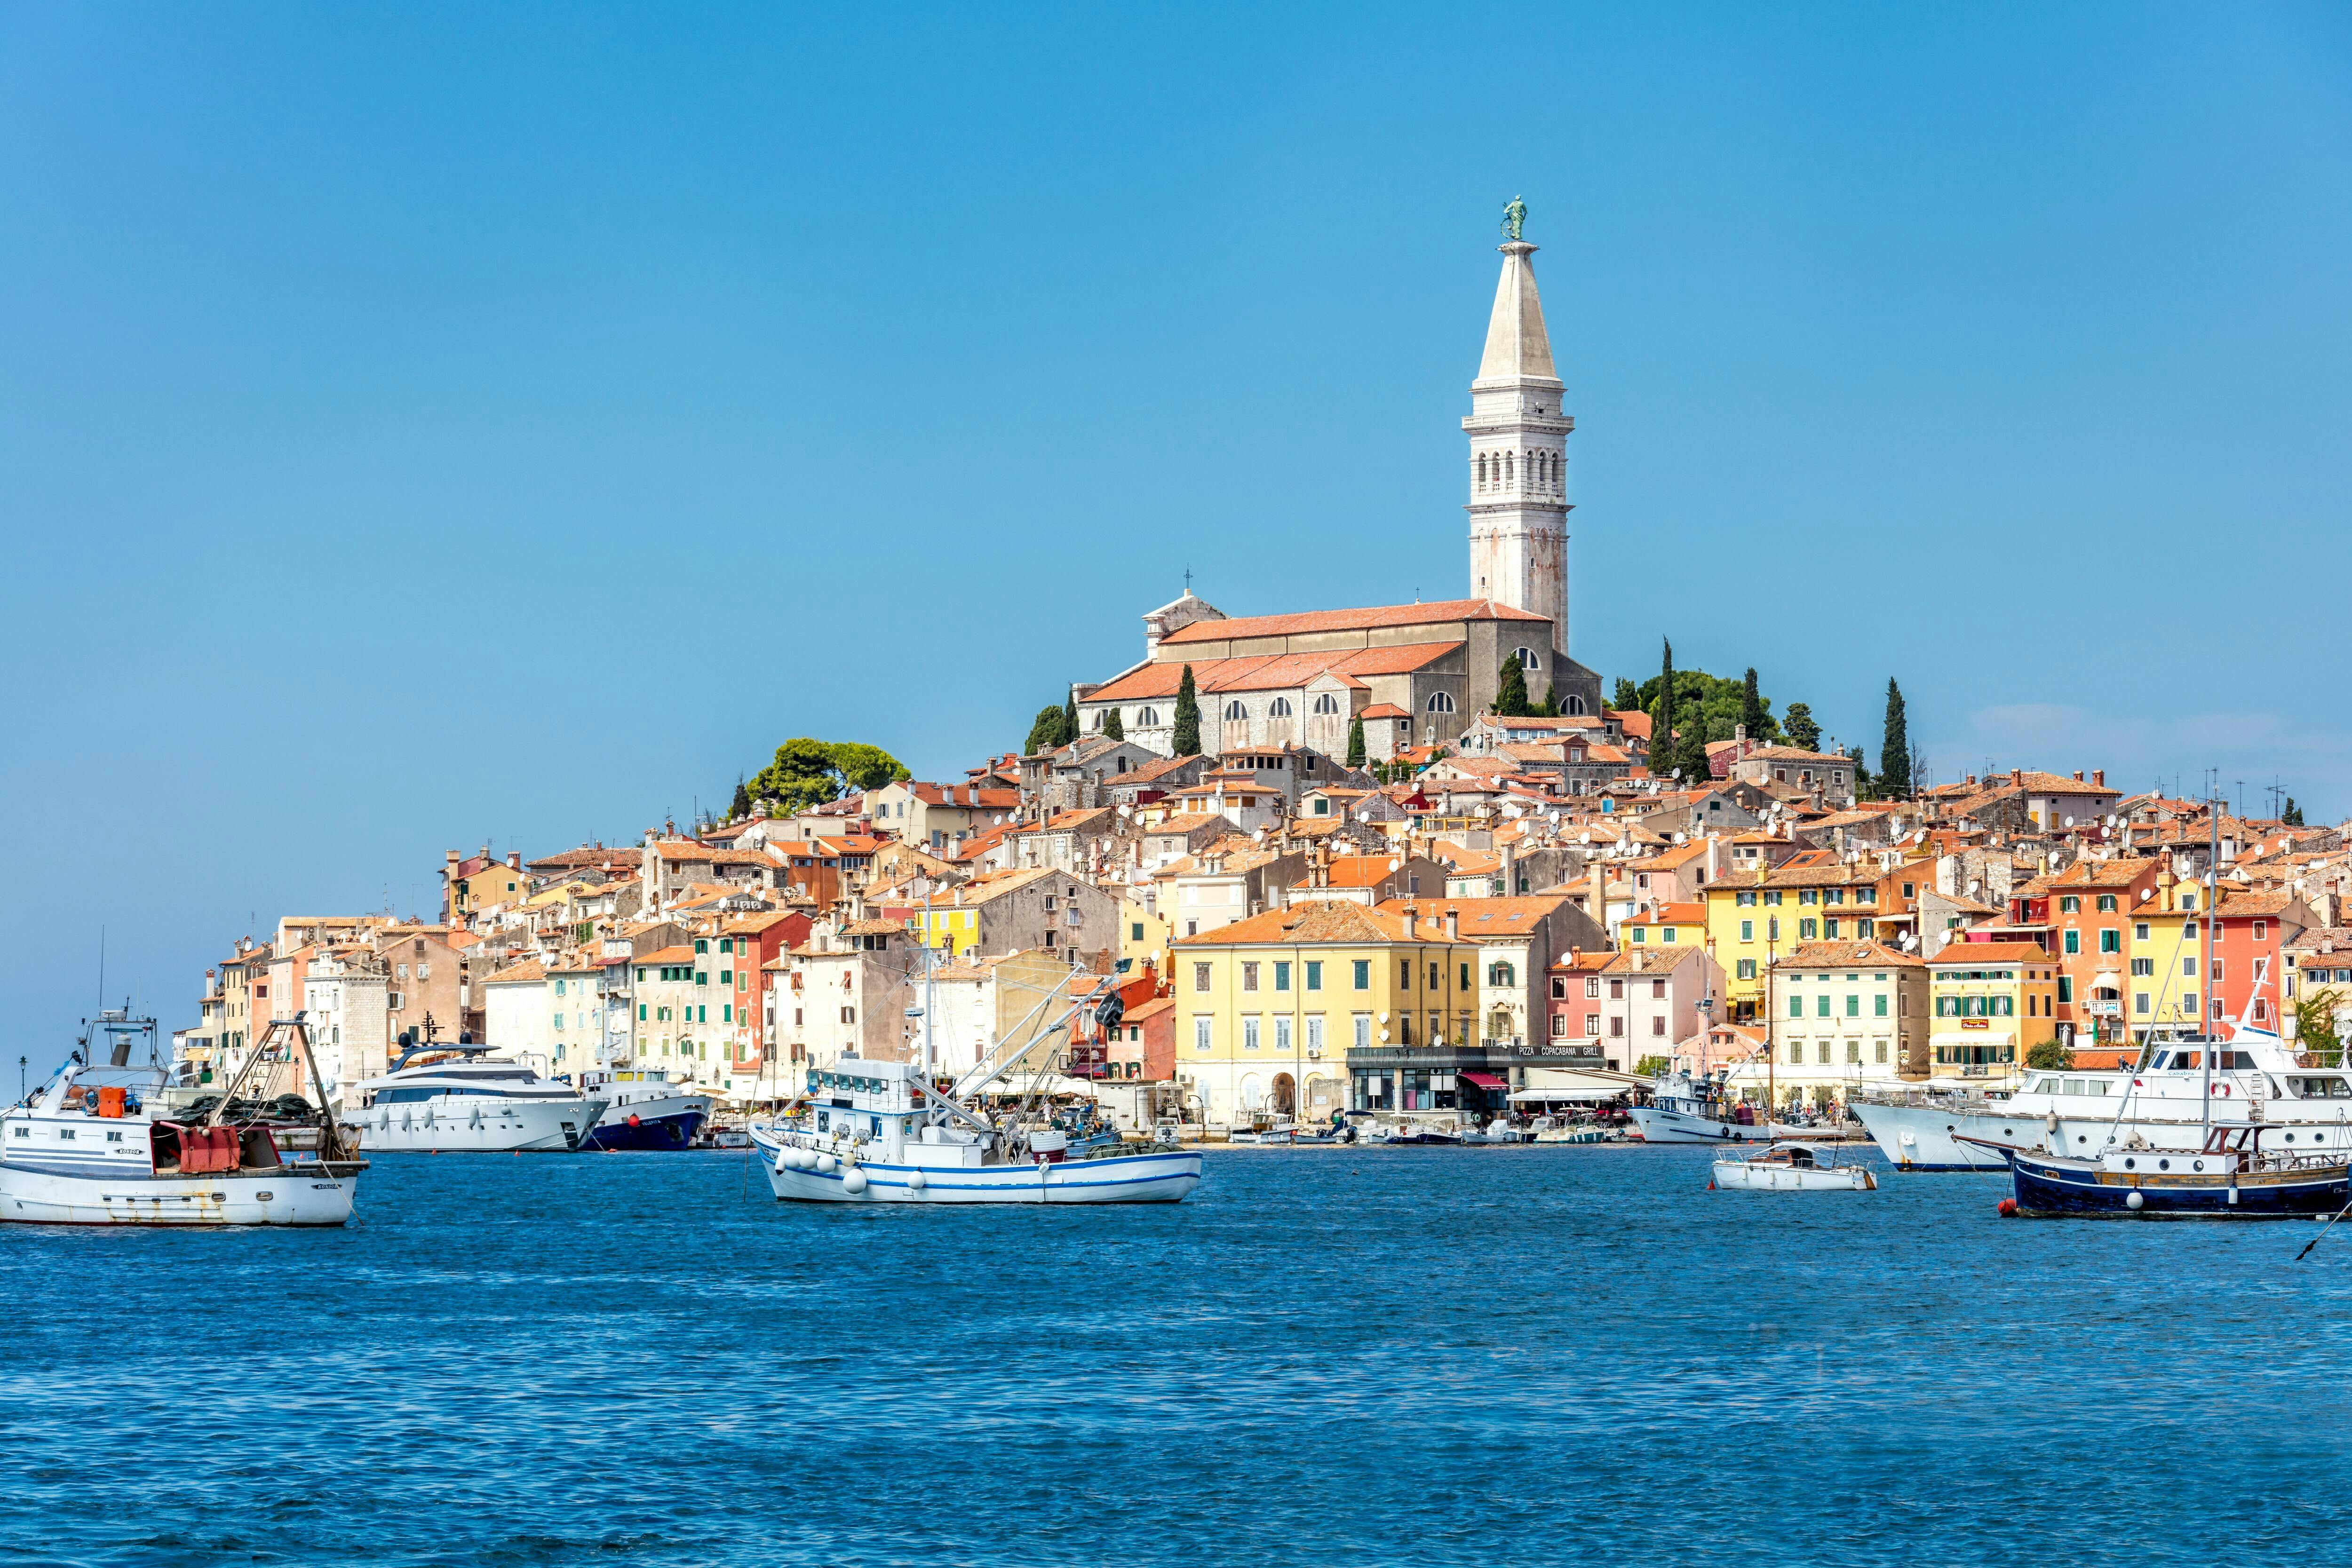 Ancient Istria Tour from Poreč including Rovinj, Pula and Lunch in Gržini